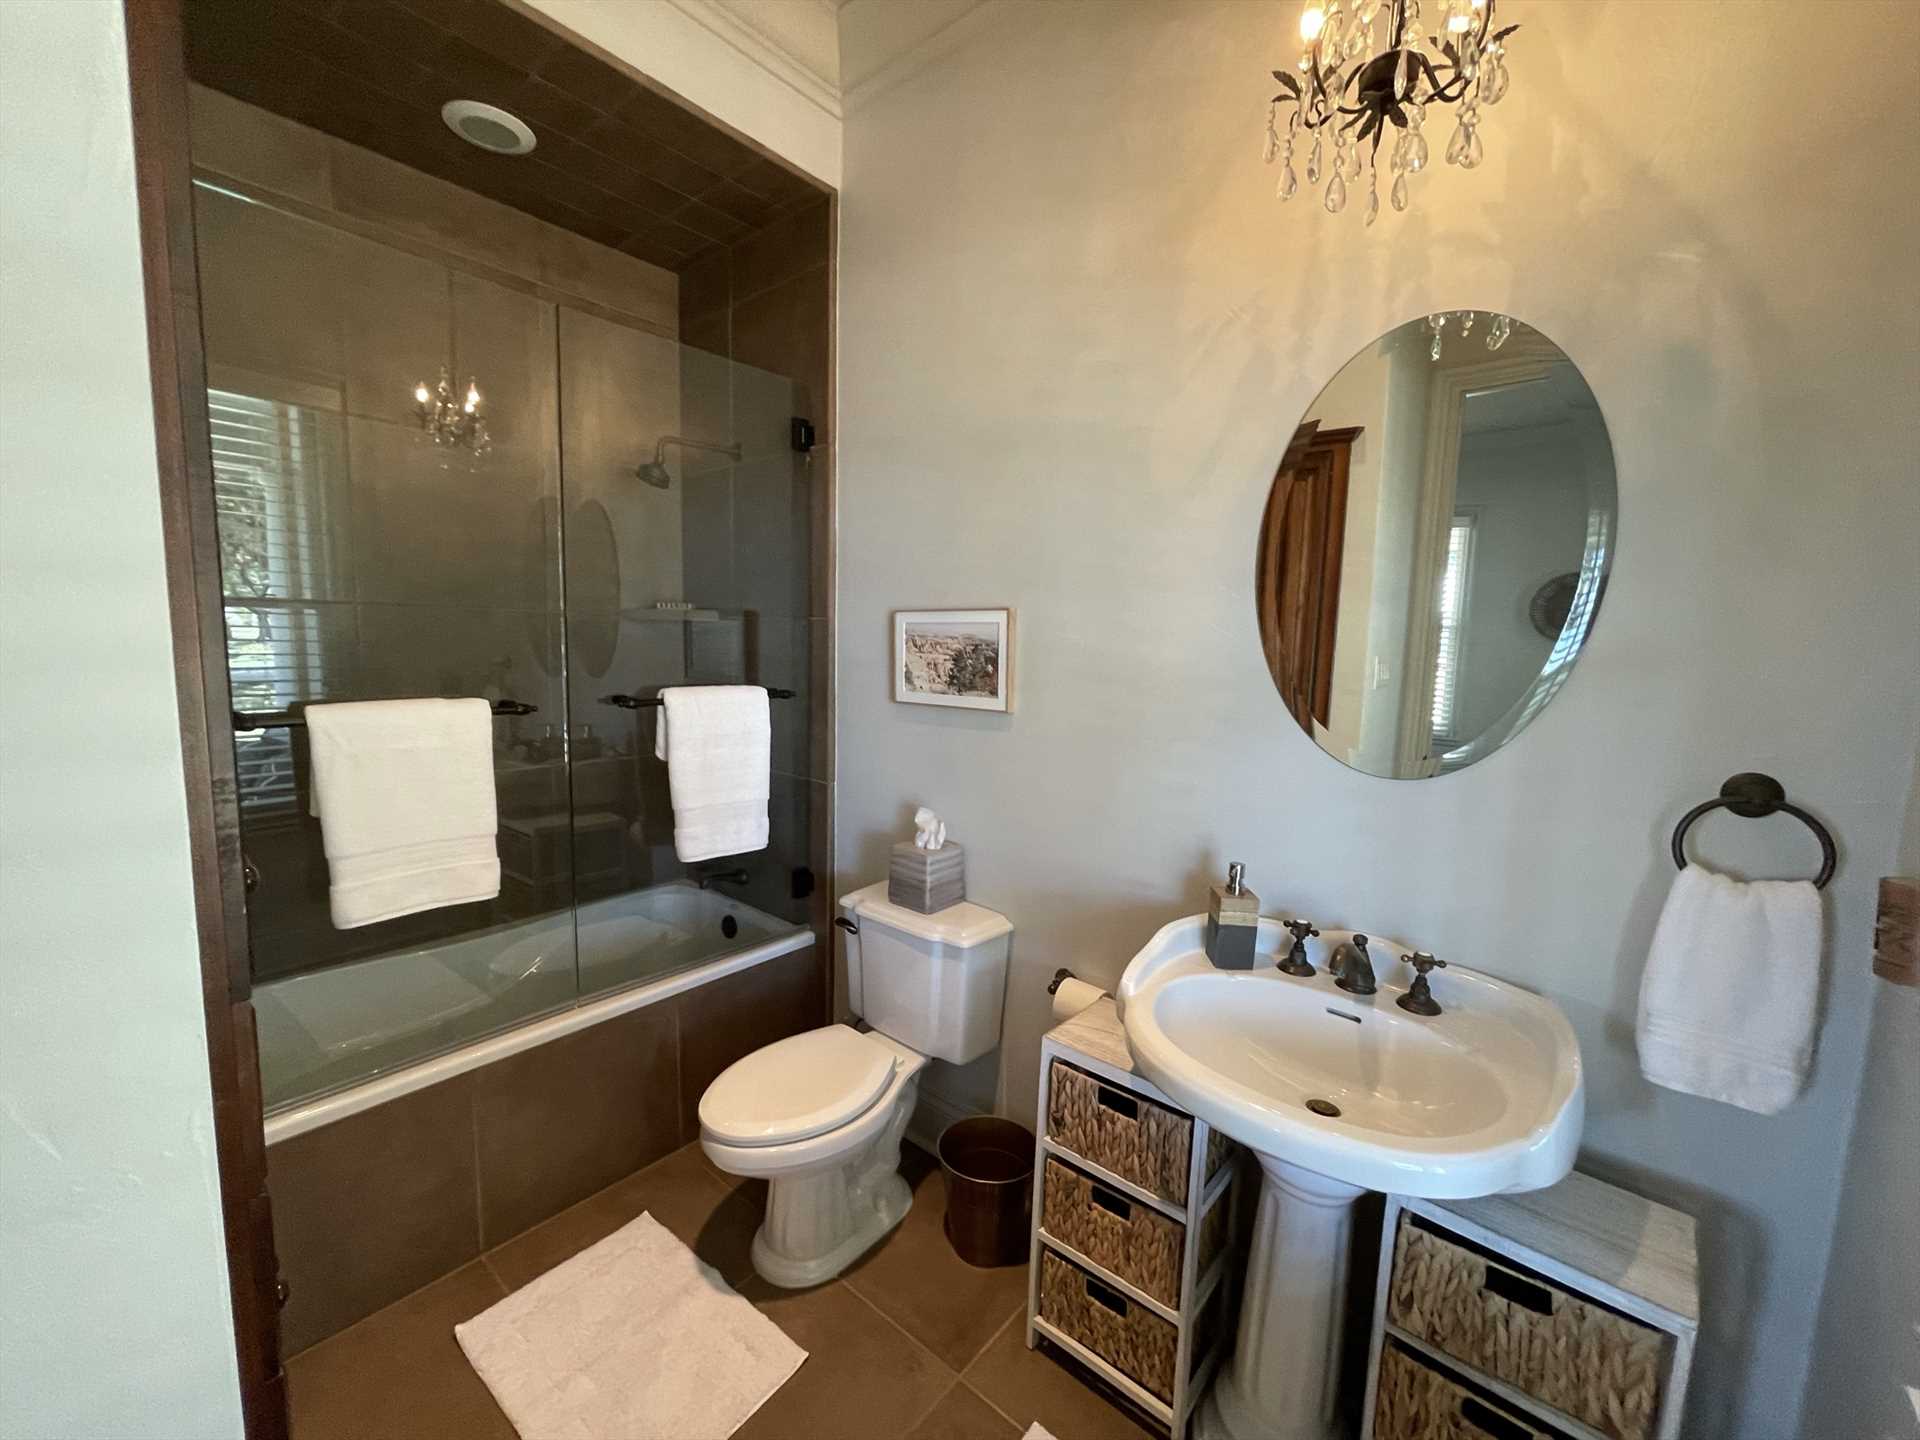                                                 All the three-and-a-half baths at La Gaye Ranch are immaculately clean, spacious, and tastefully decorated.